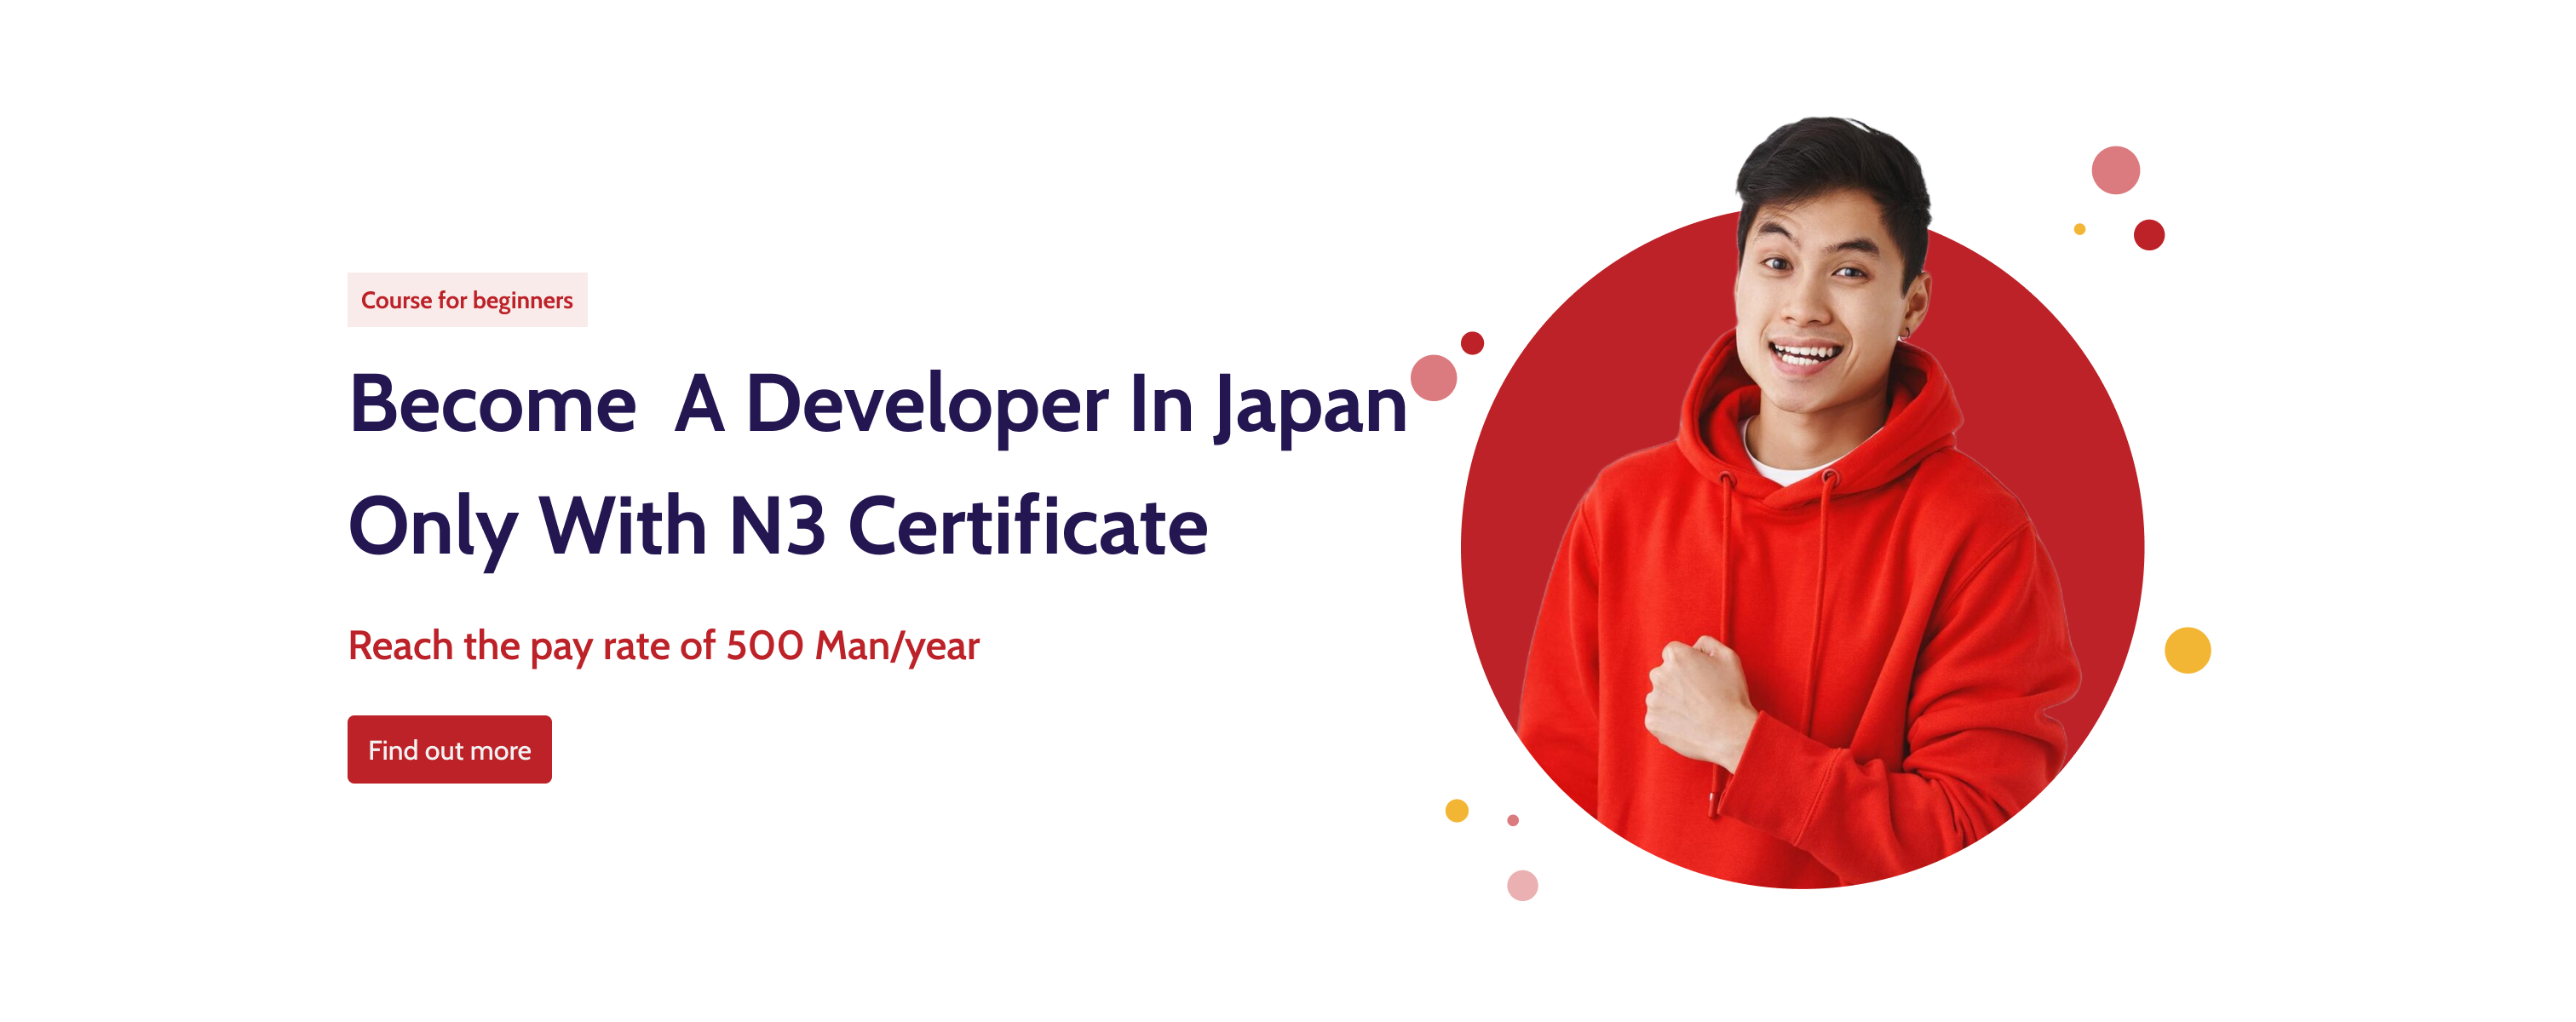 Become A Developer In Japan